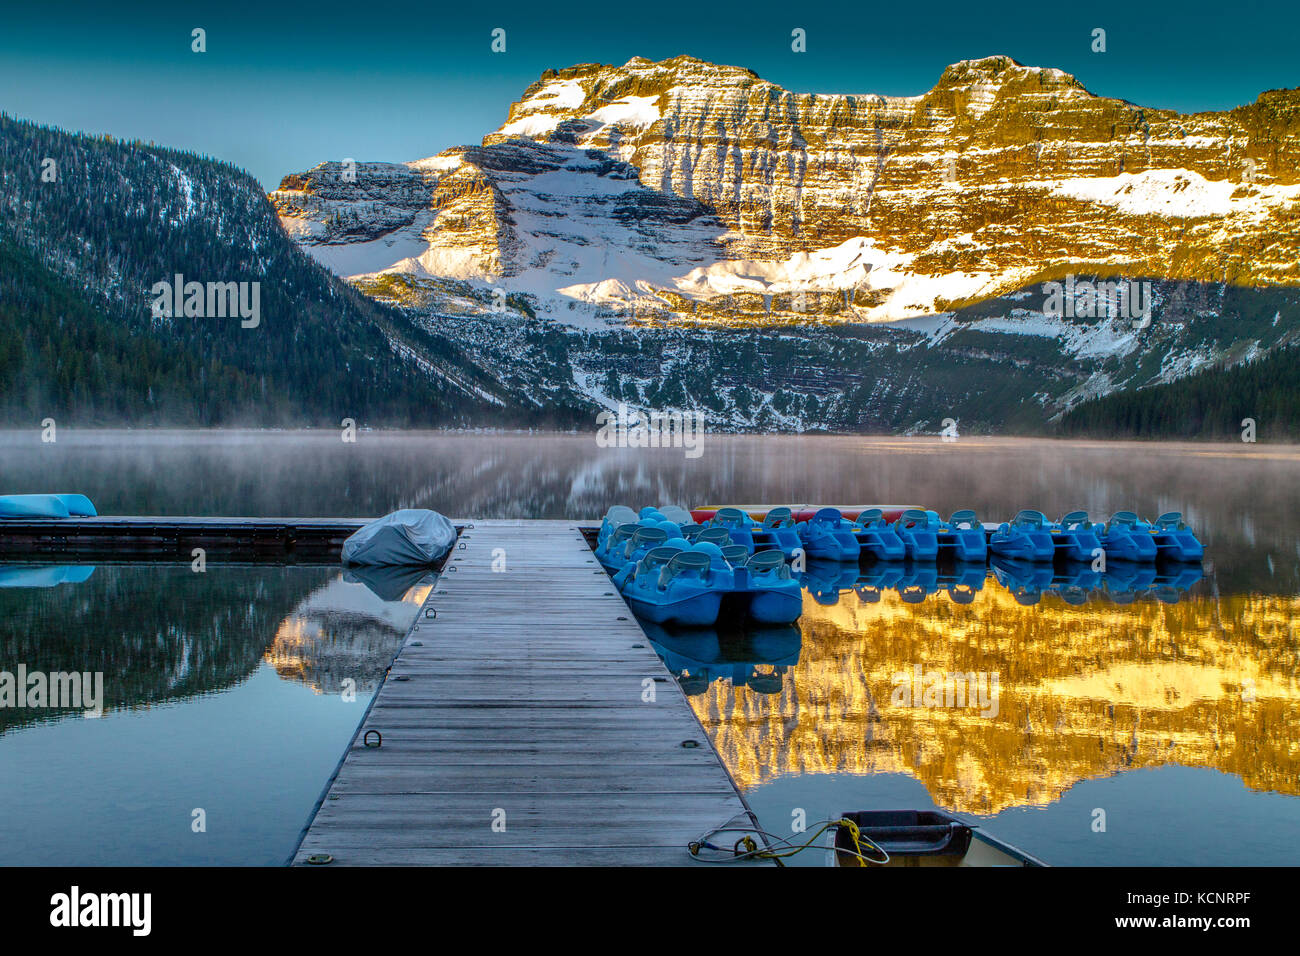 Cameron Lake in the early morning light showing wooden pier and canoe, with mountain reflections in lake. Waterton National Park, Alberta, Canada Stock Photo